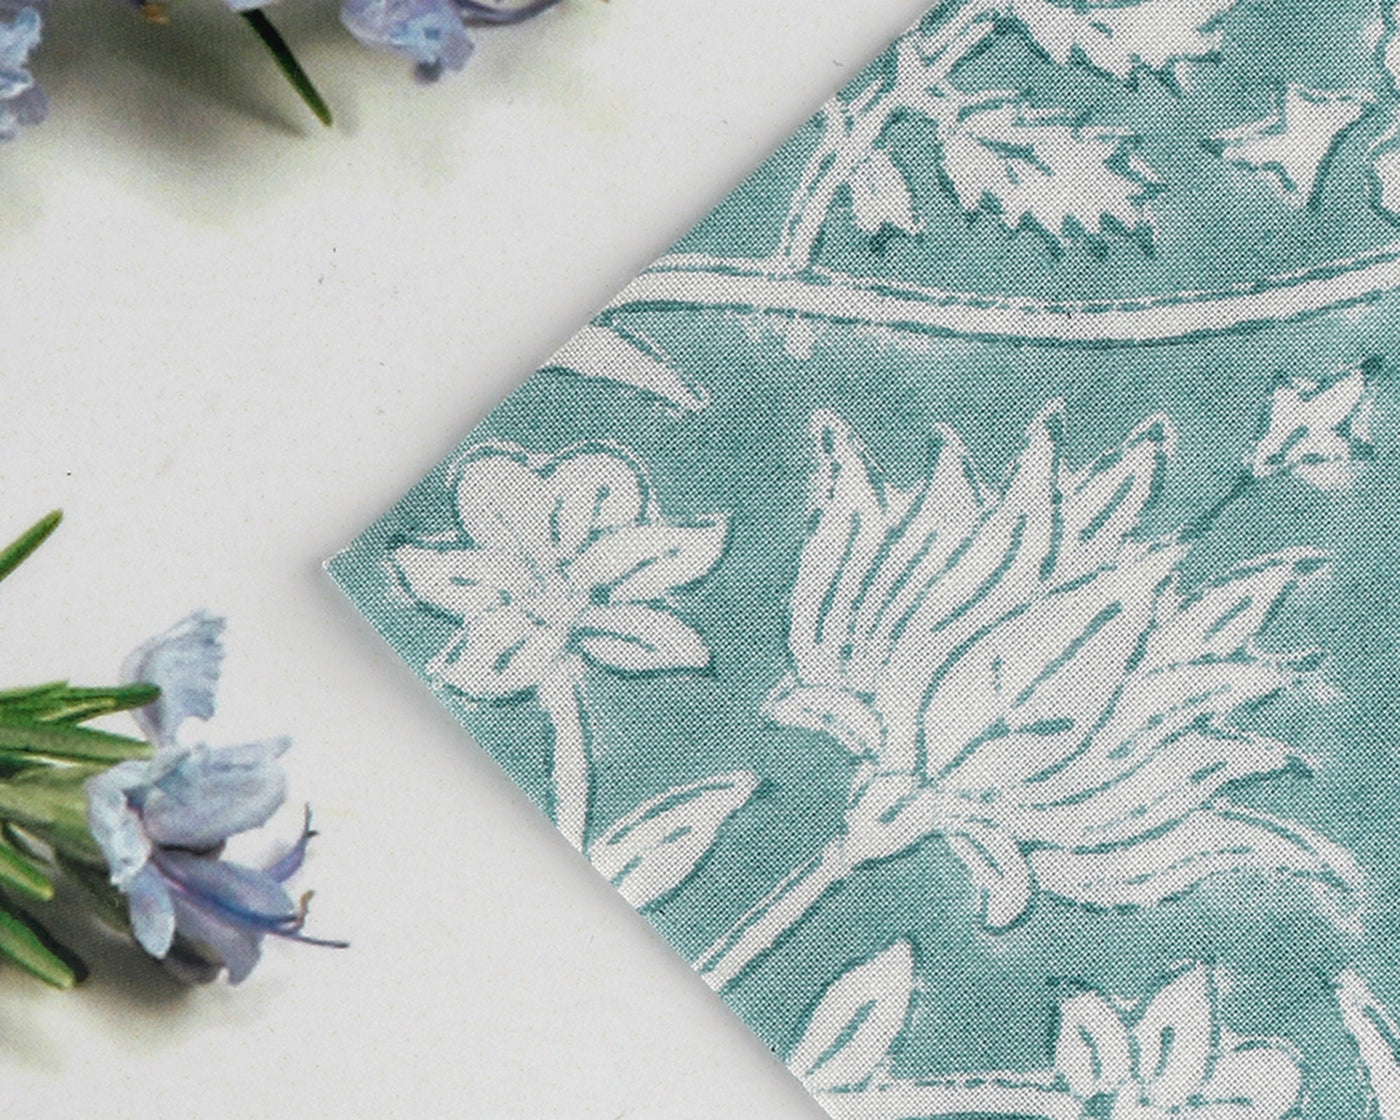 Fabricrush Teal Blue and Off White Indian Floral Hand Block Printed 100% Pure Cotton Cloth Napkins, Gifts, 18x18"Cocktail Napkins, 20x20" Dinner Napkins